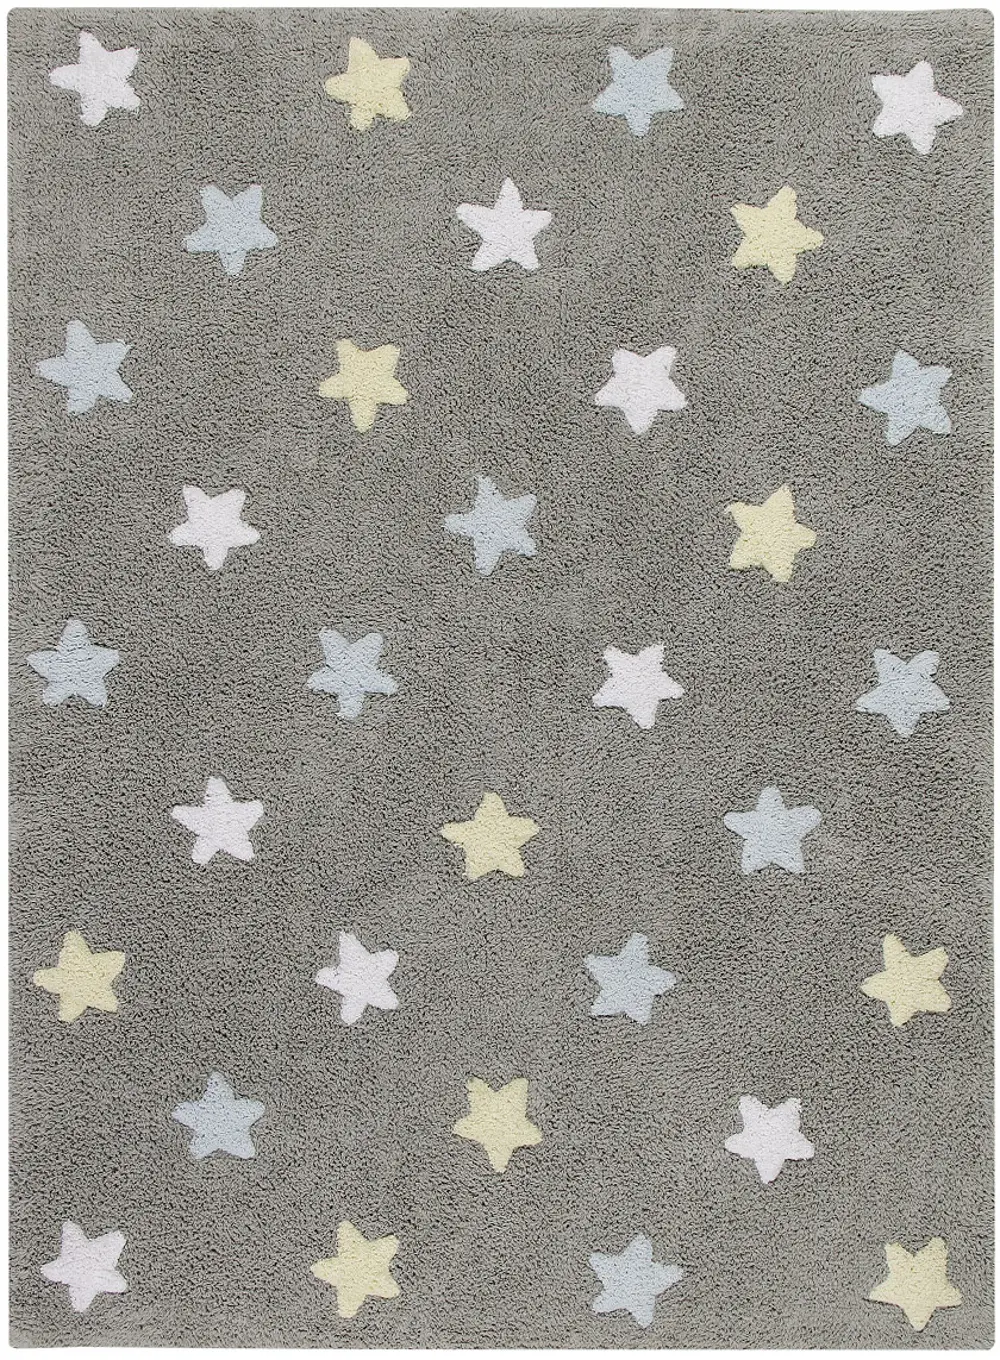 C-ST-B 4 x 5 Small Tricolor Stars Gray and Blue Washable Rug-1